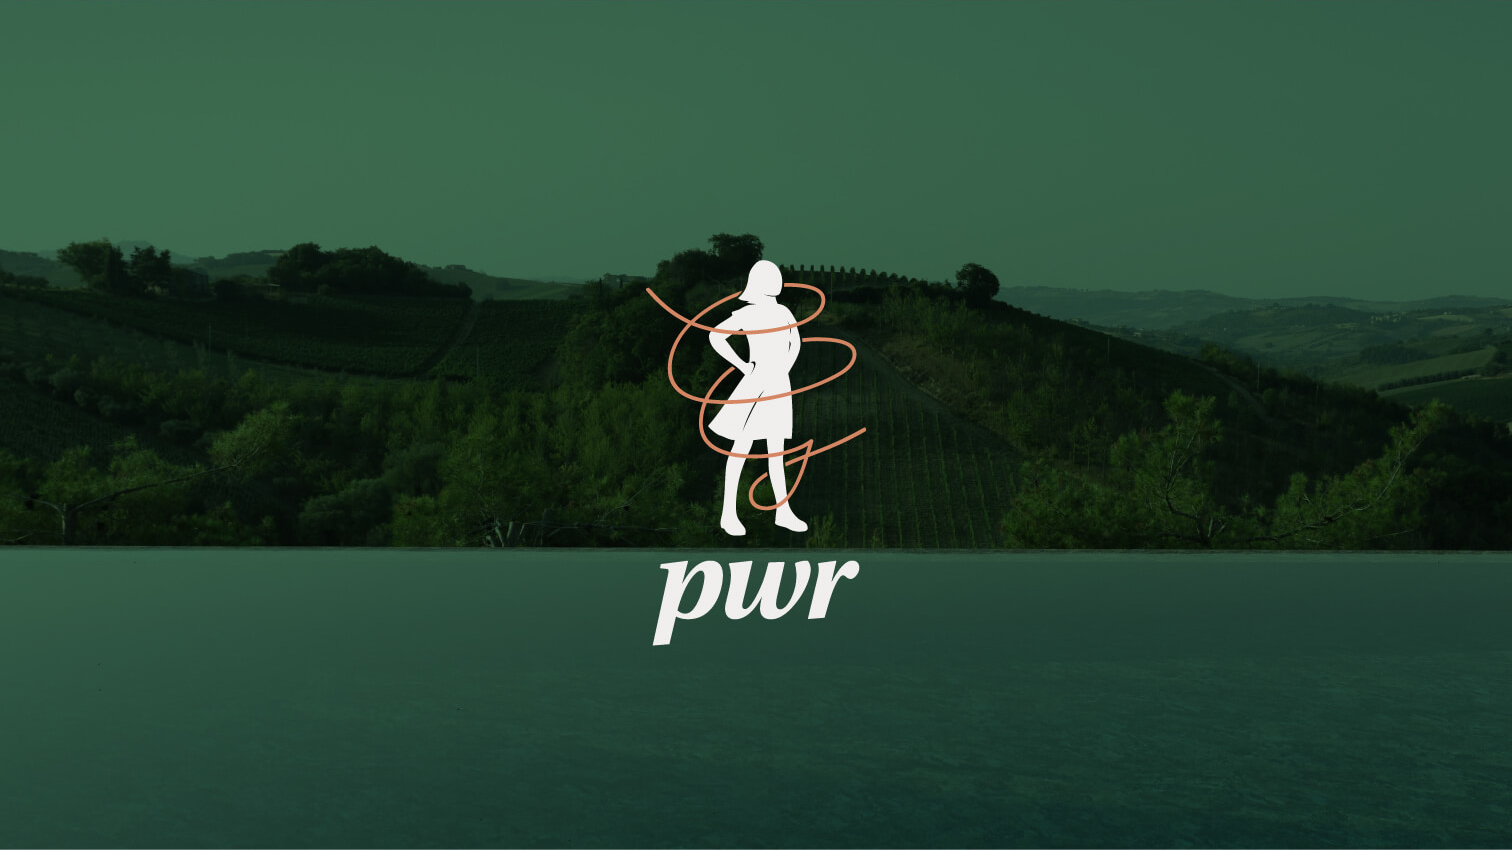 AboutYou_Case History_PWR_Branding_02a